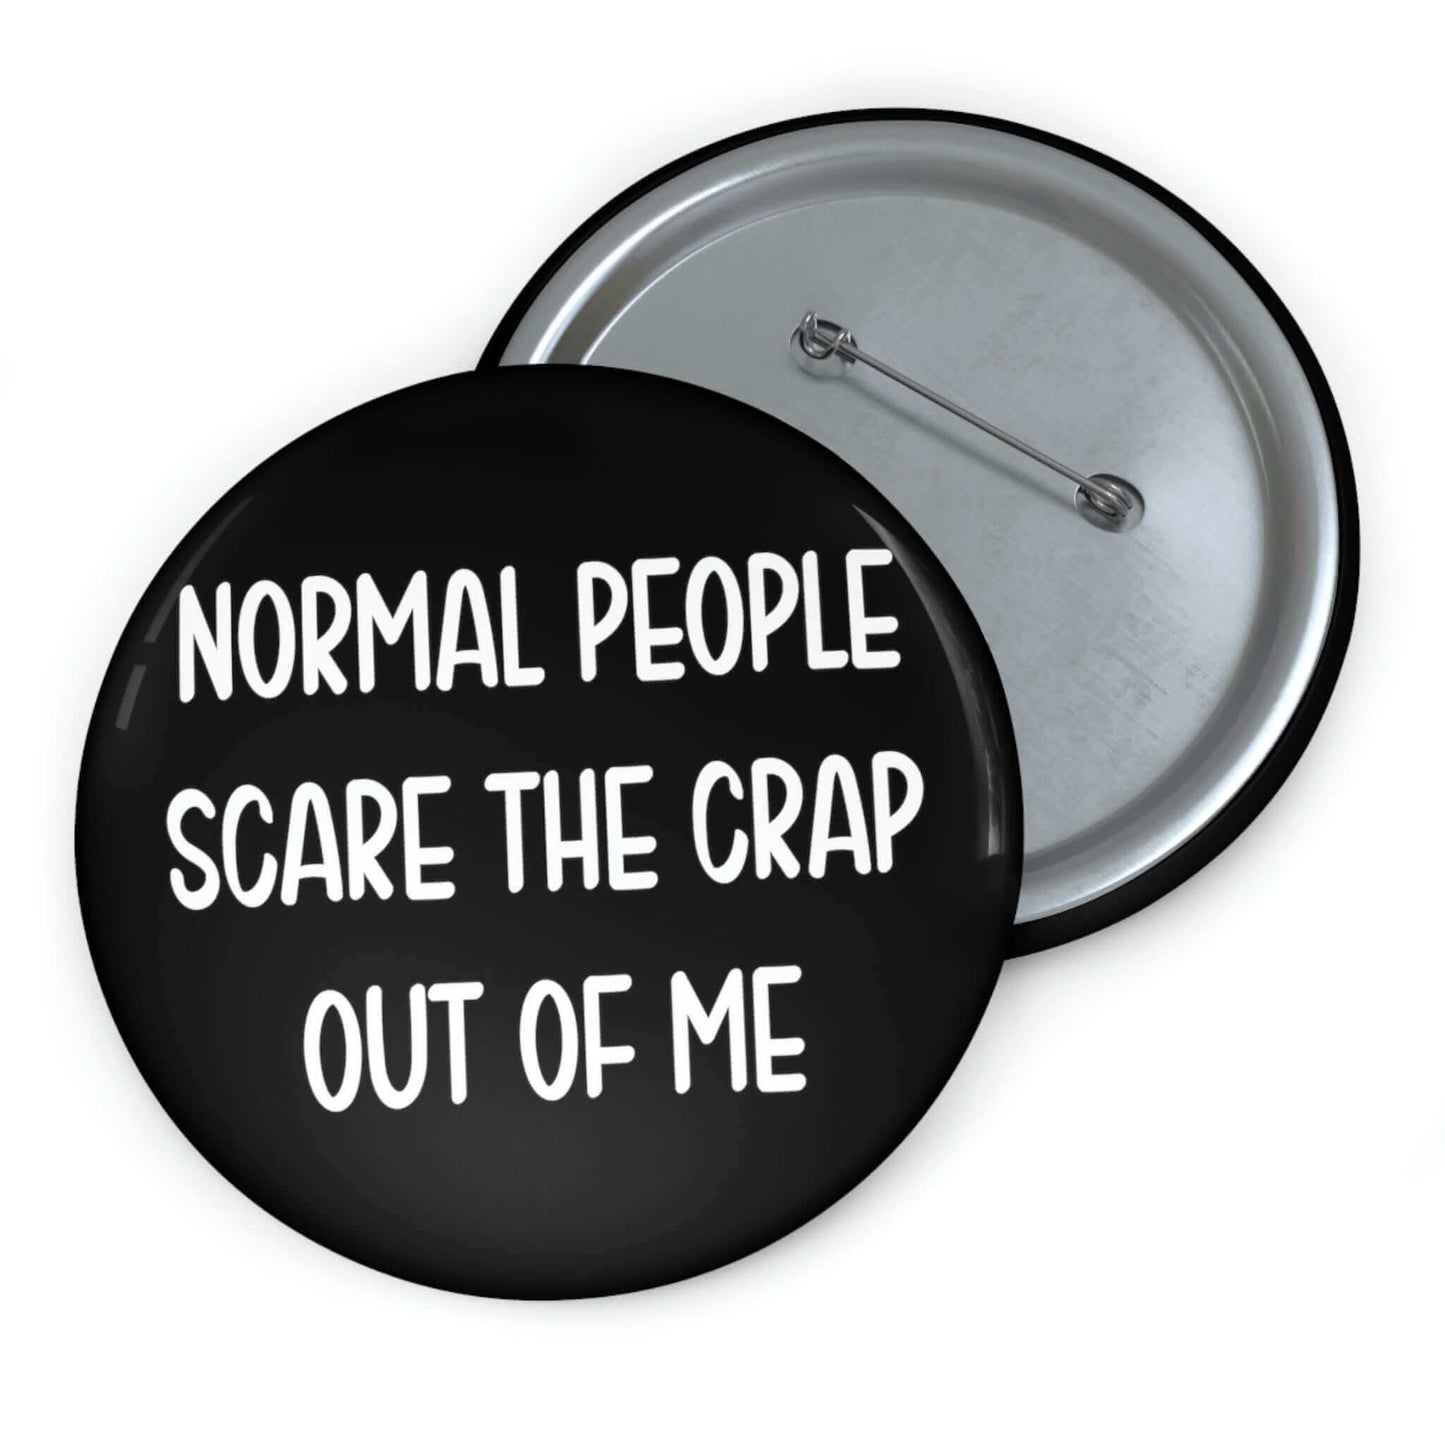 Normal people scare the crap out of me pinback button